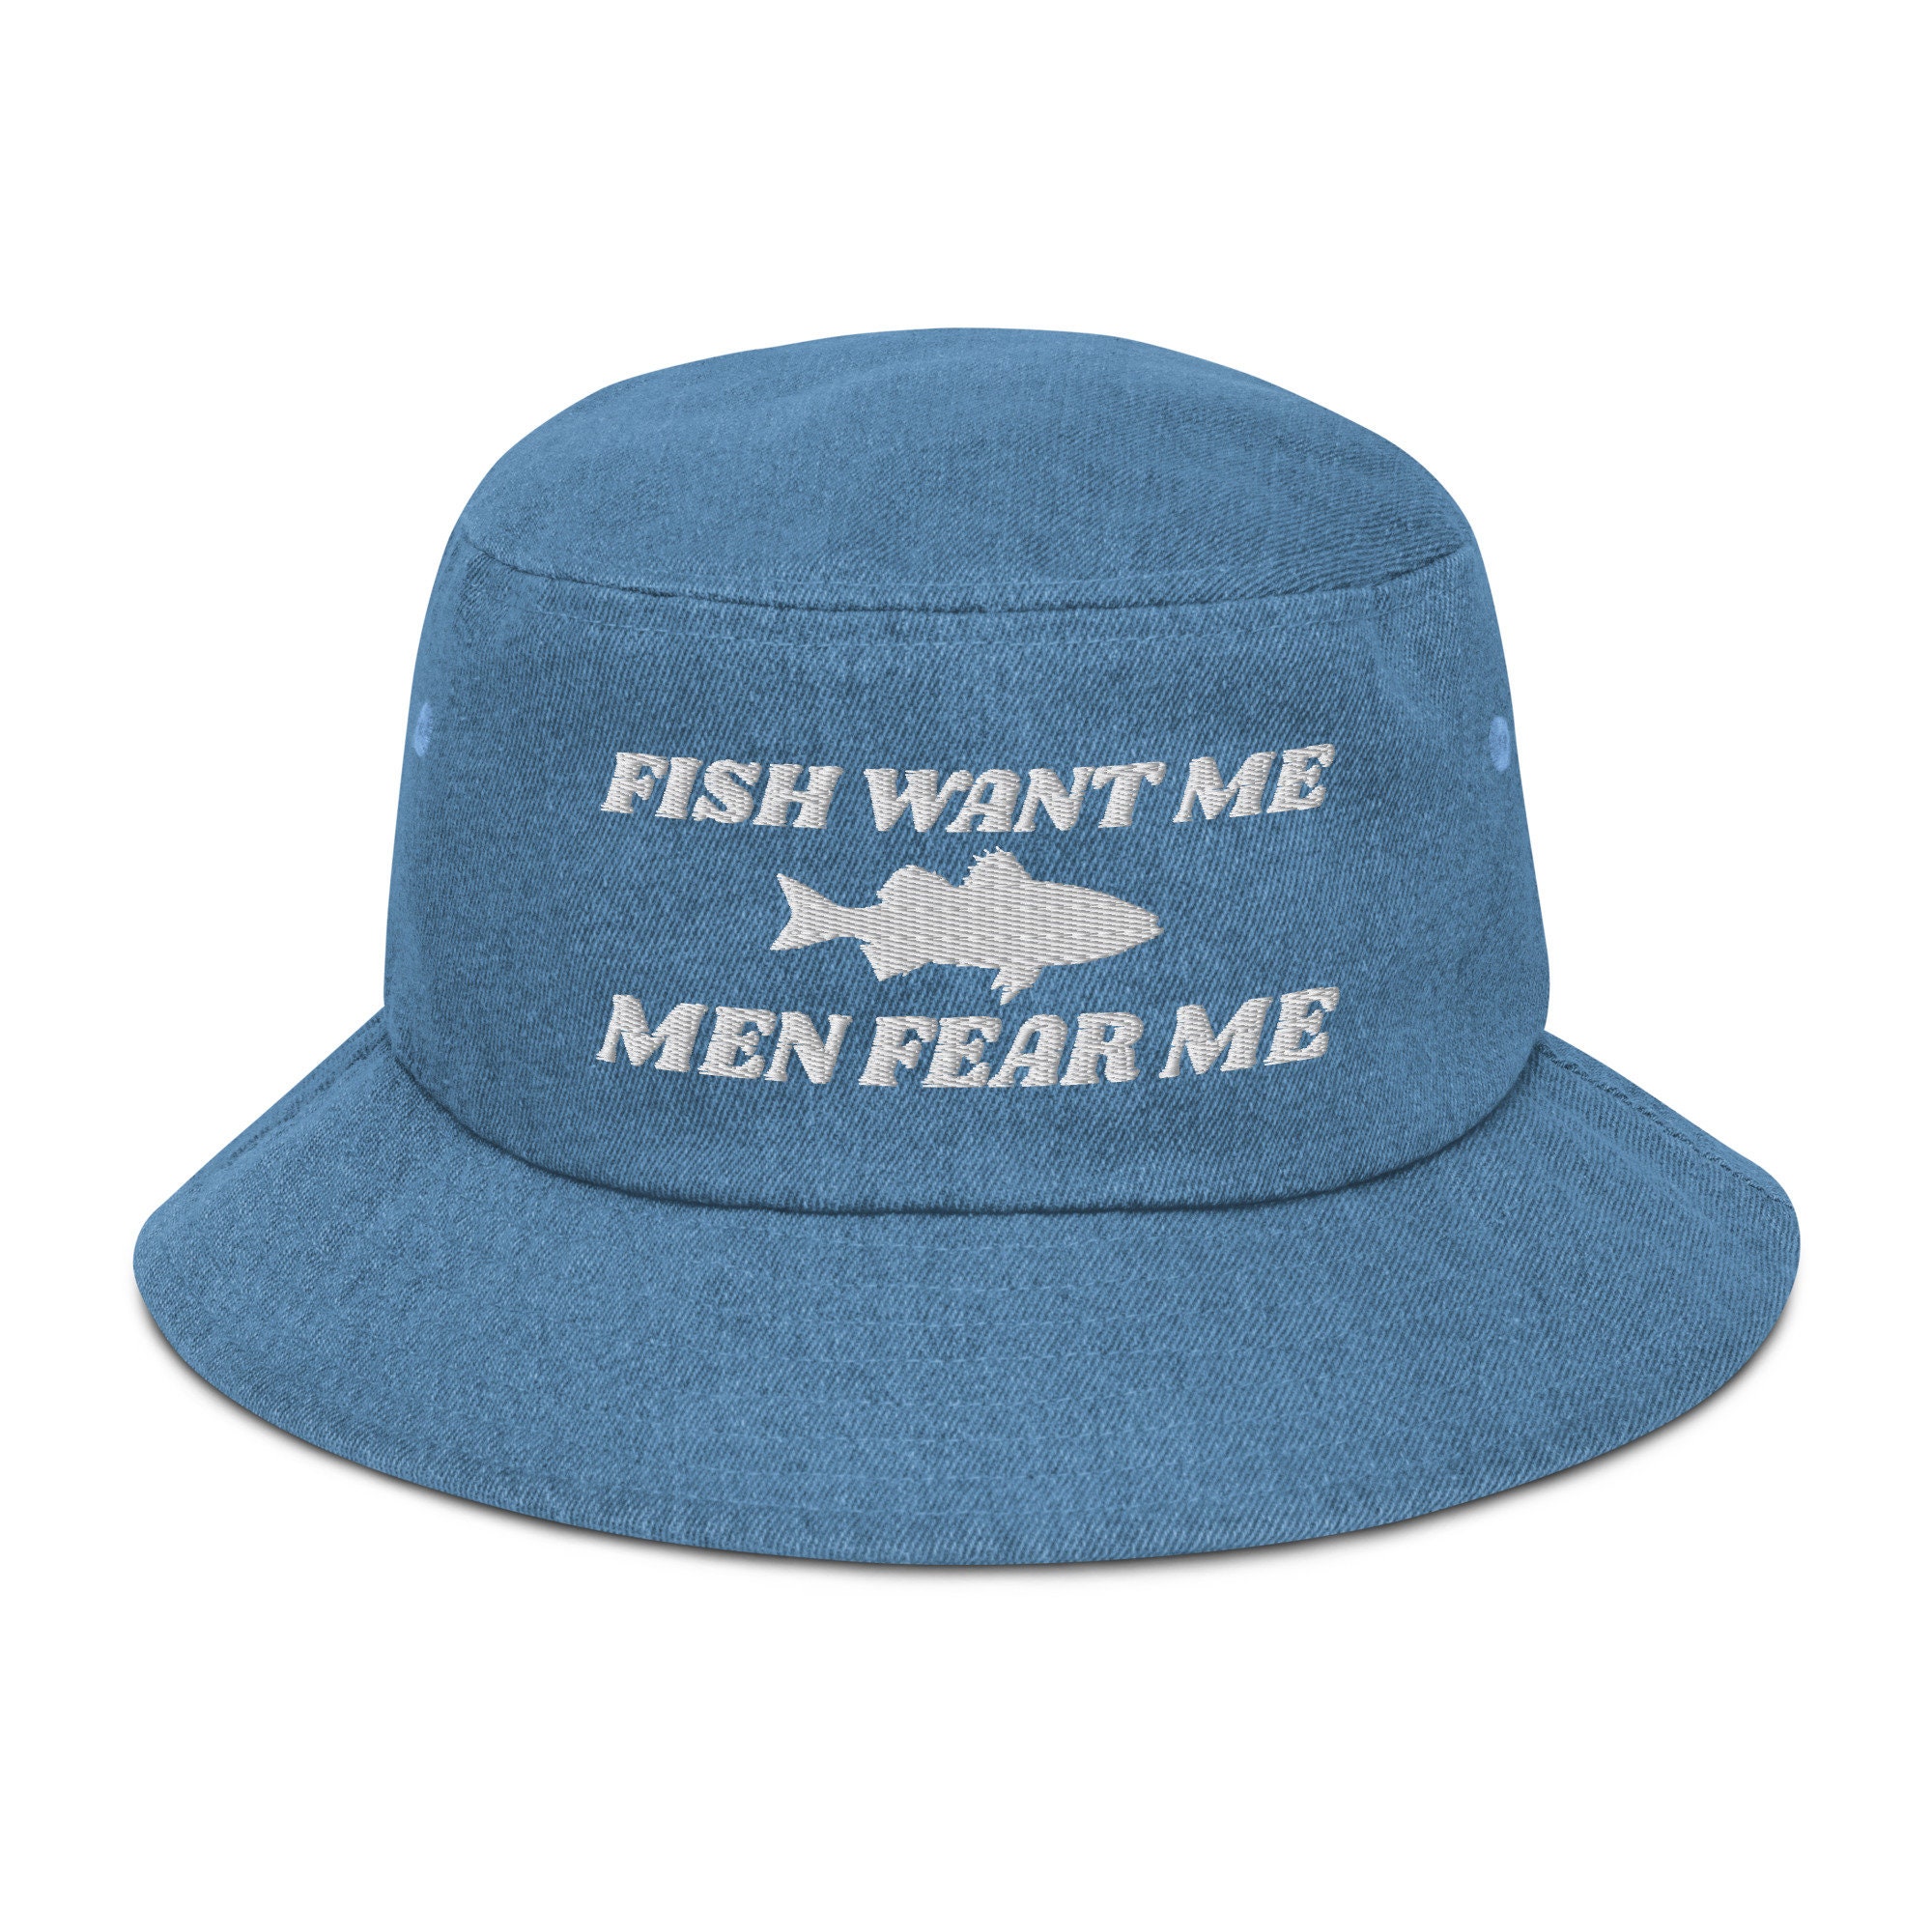 Fish Want Me - Men Fear Me - Embroidered Funny Fishing Lovers Denim Bucket Hat Design, Fishing Lovers Funny Gift, Meme Gift Bucket Hat